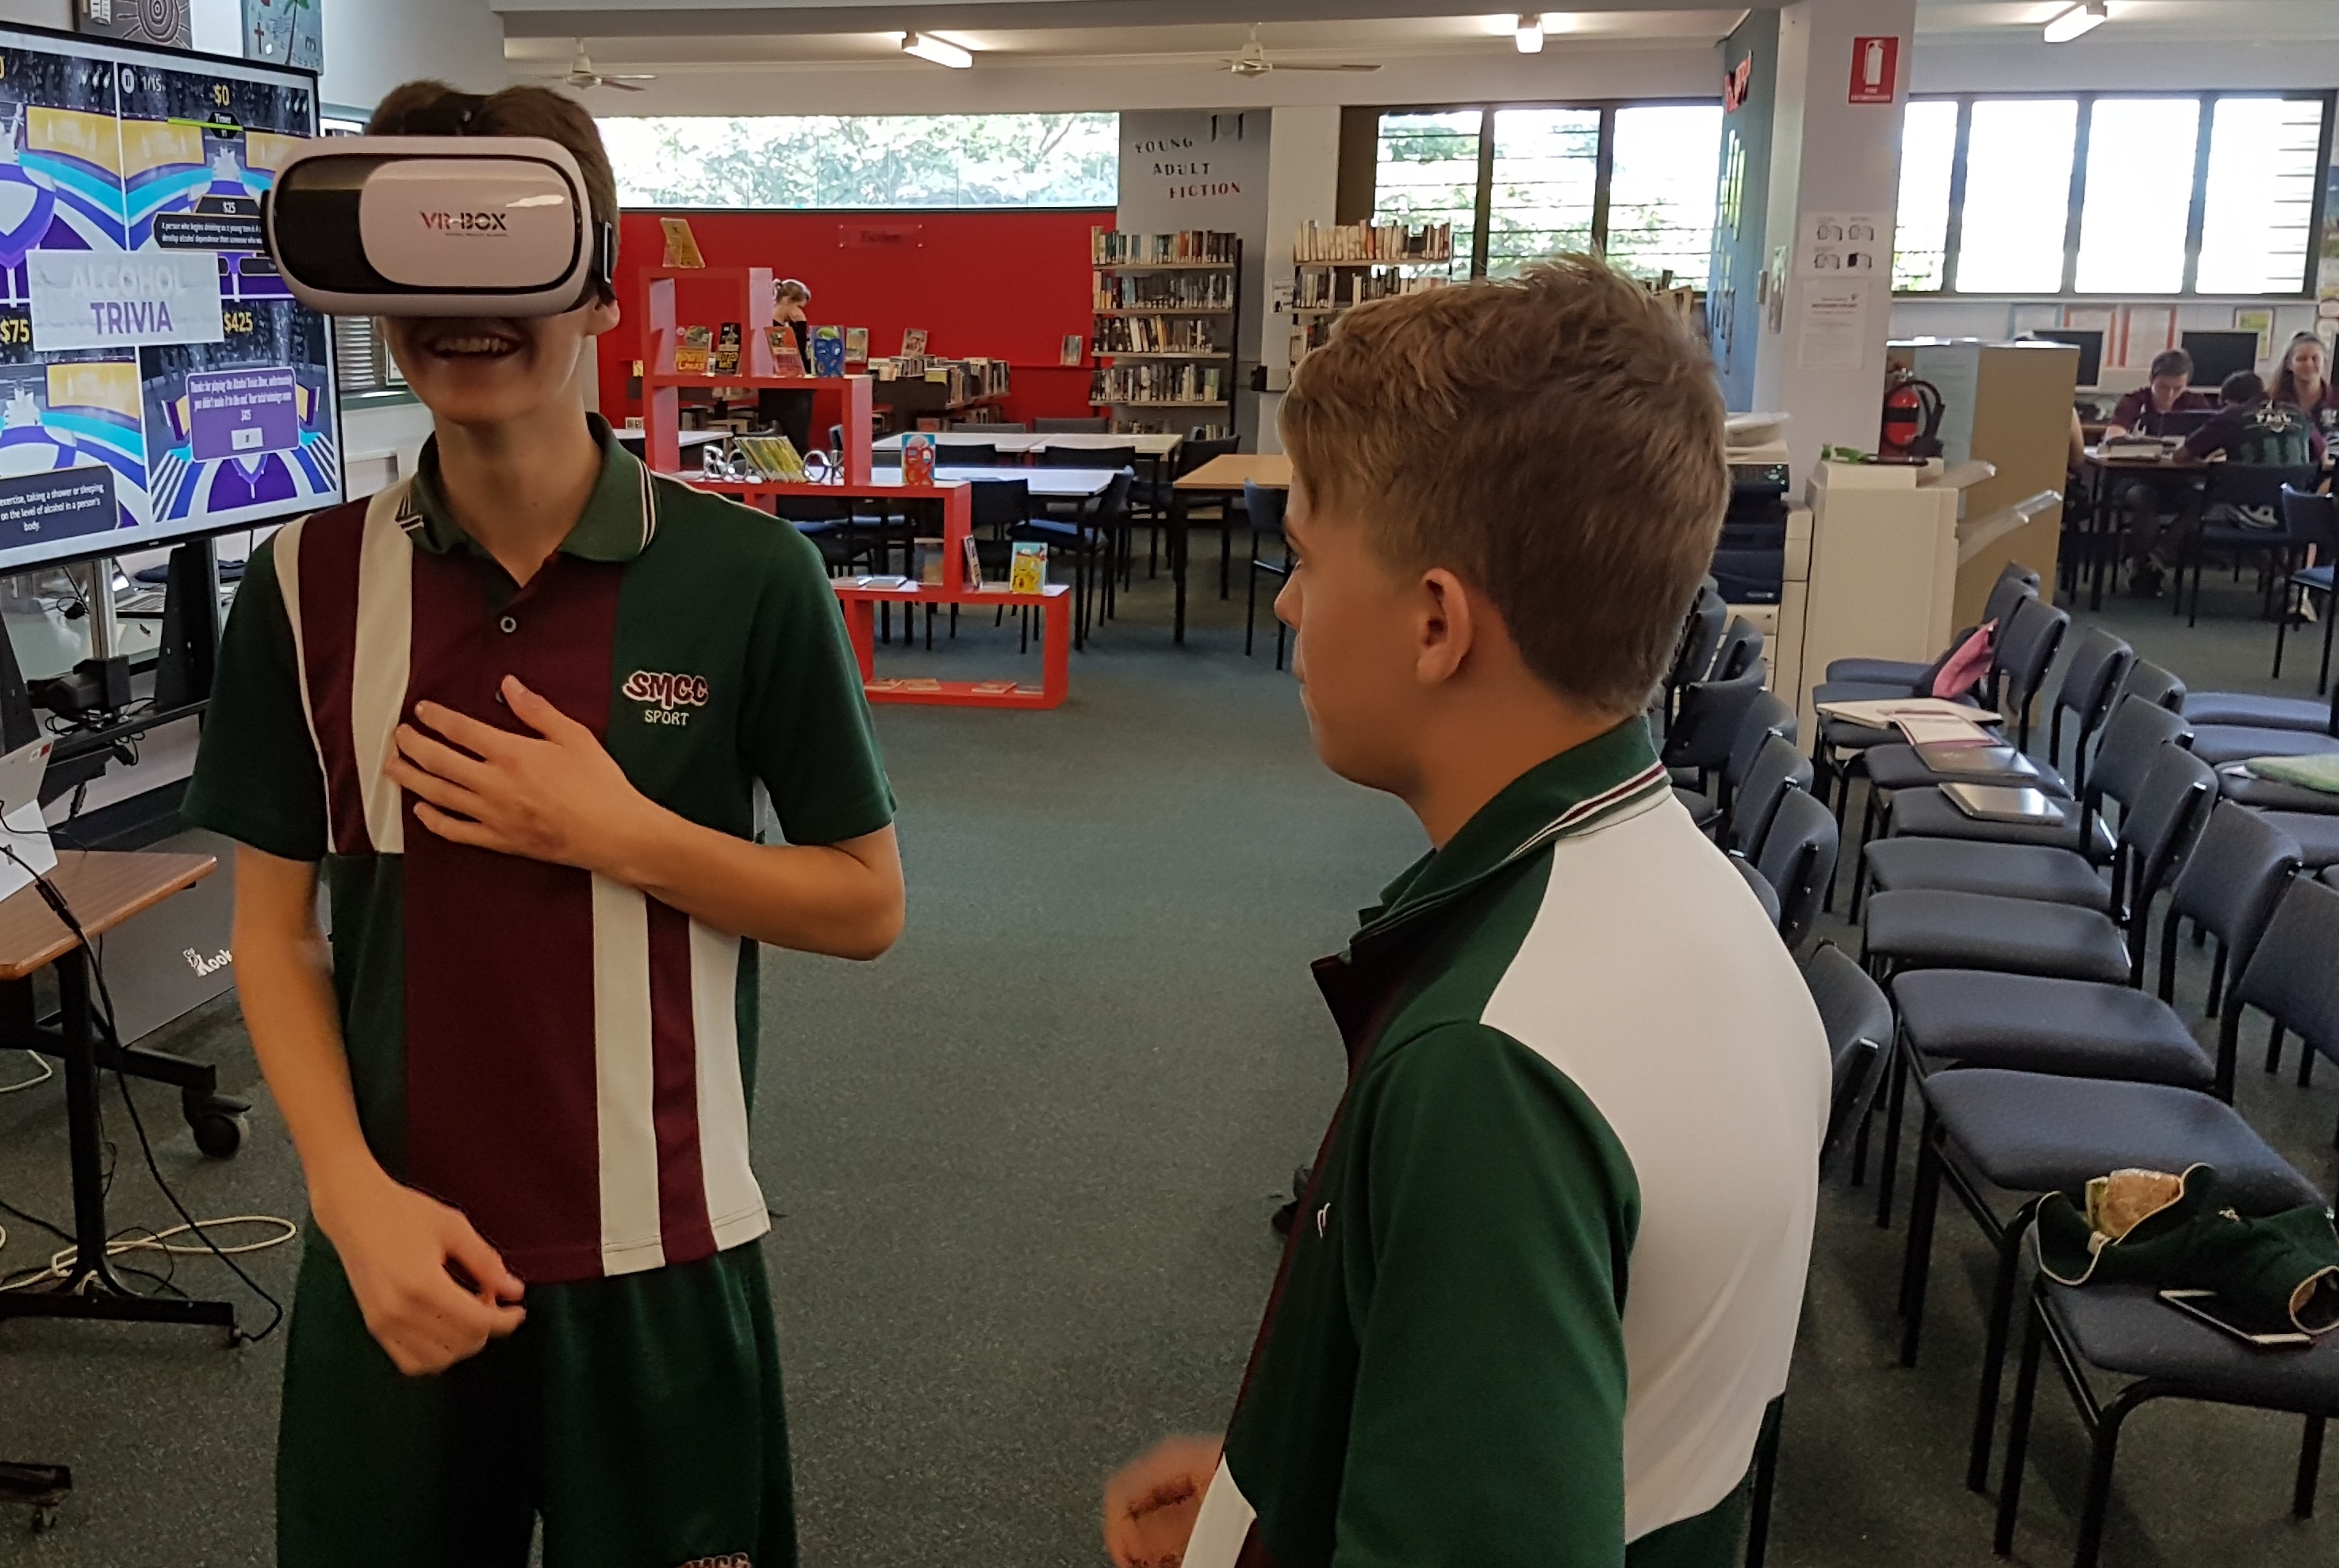 A Griffith University virtual reality project has been shortlisted for a national education award.